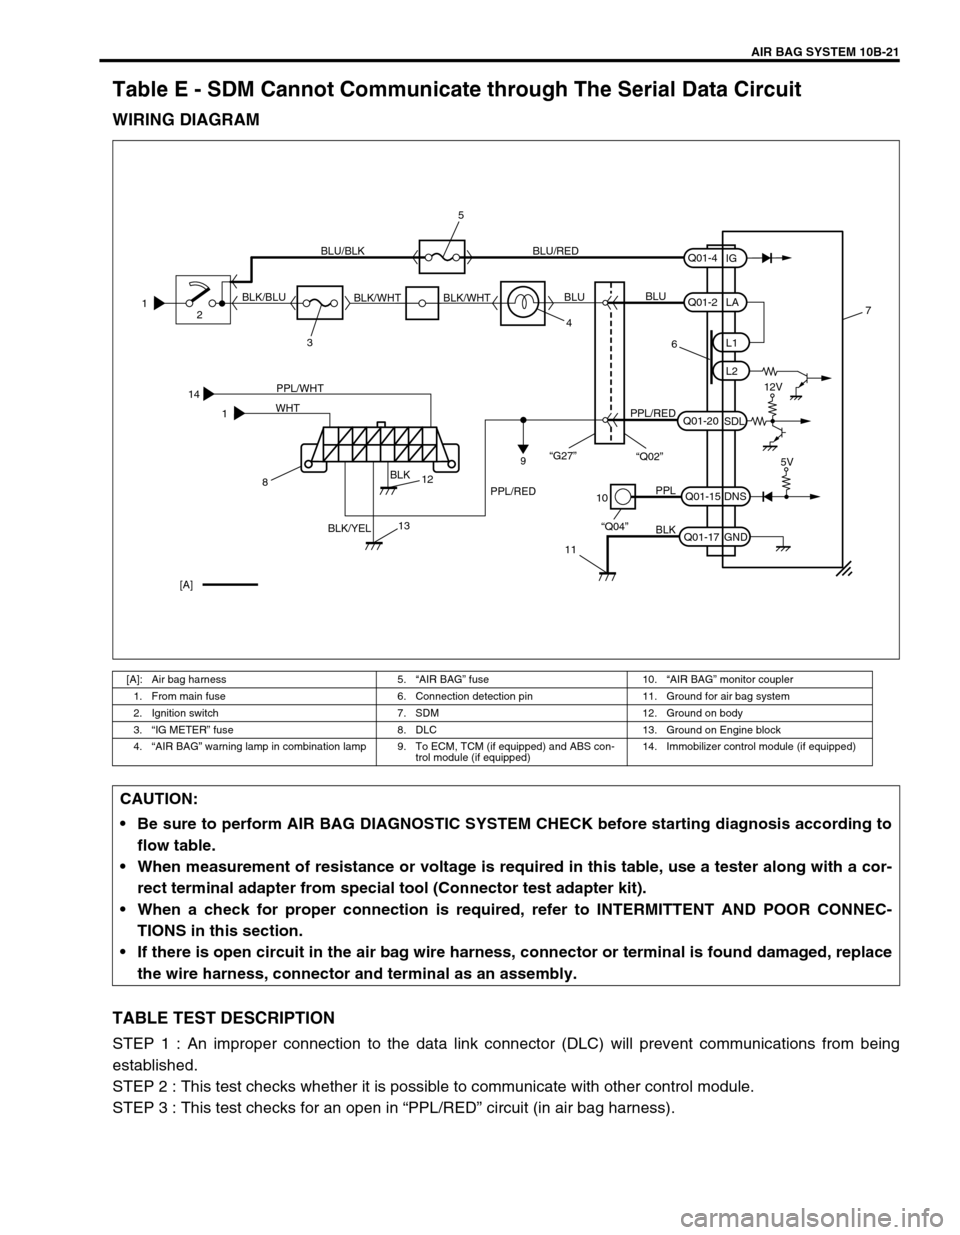 SUZUKI GRAND VITARA 1999 2.G Owners Manual AIR BAG SYSTEM 10B-21
Table E - SDM Cannot Communicate through The Serial Data Circuit
WIRING DIAGRAM
TABLE TEST DESCRIPTION
STEP 1 : An improper connection to the data link connector (DLC) will preve